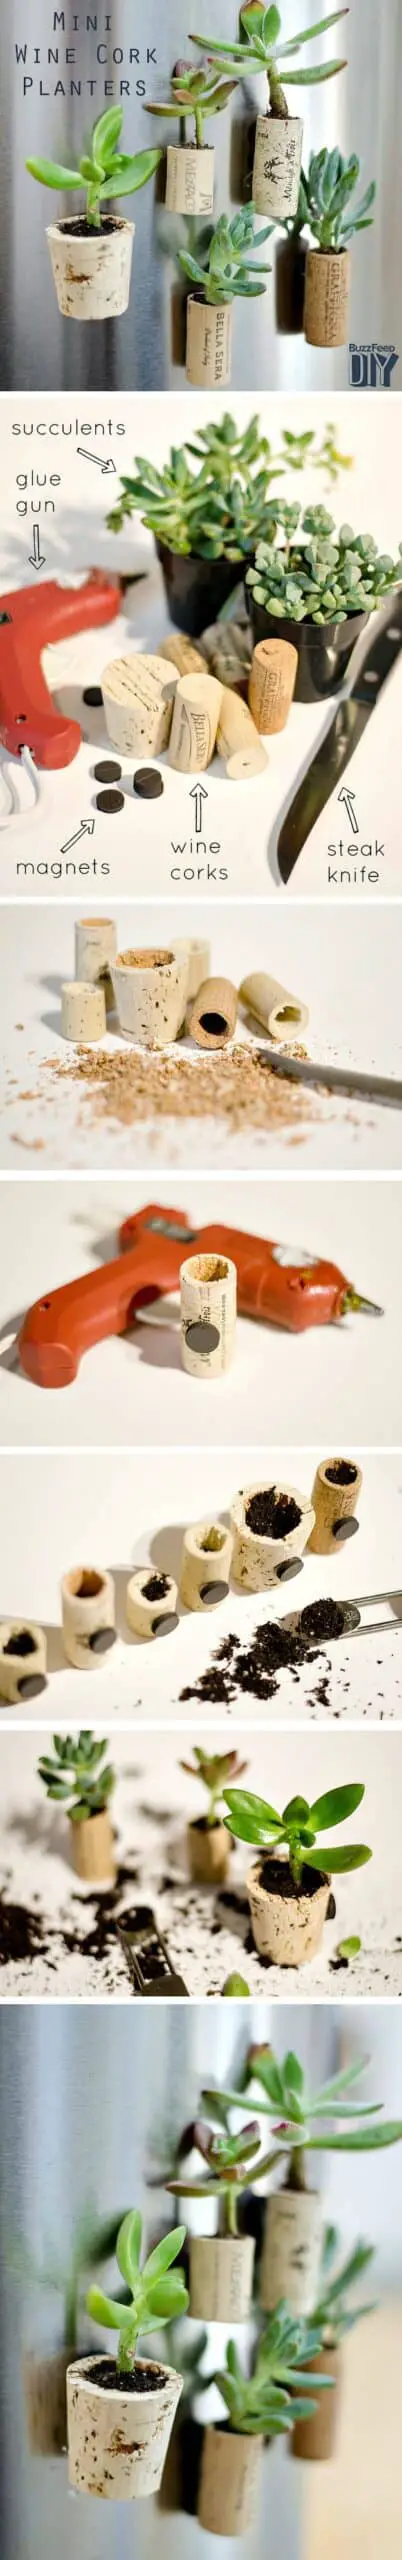 Diy: Tiny Planters From Upcycled Wine Corks 14 - Garden Decor